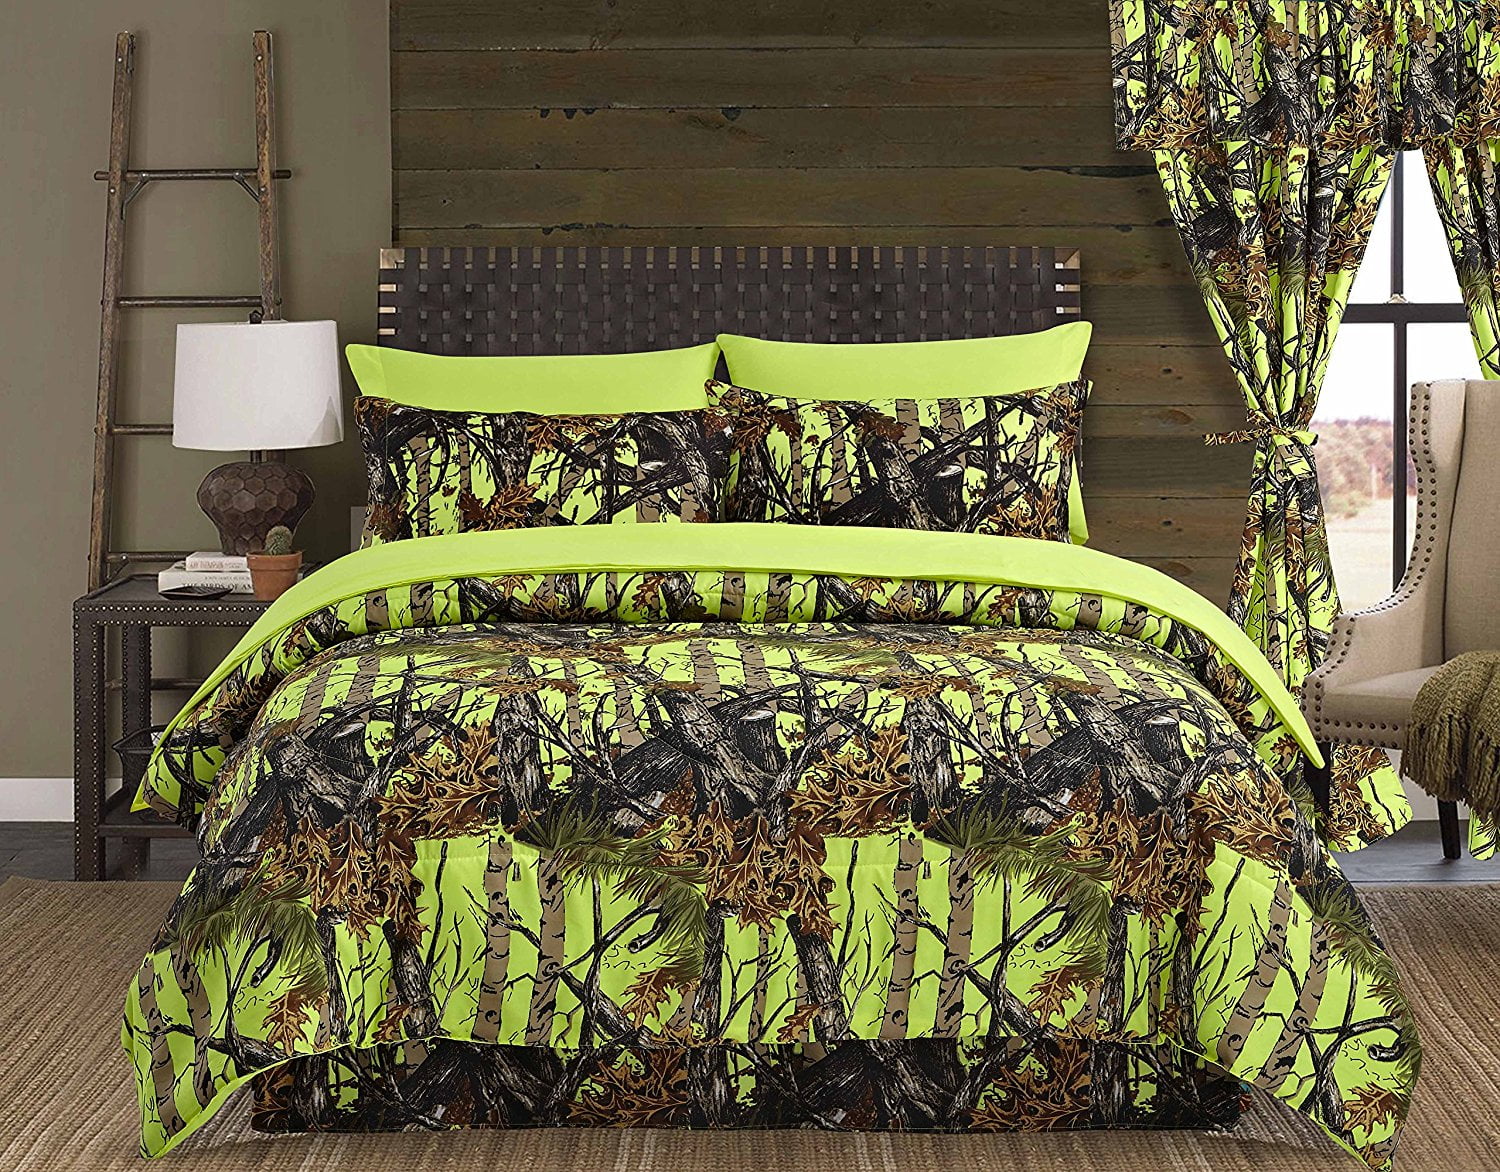 MIXED SET w KING COMFORTER SHEETS CAMOUFLAGE CURTAINS 12 PC LIME CAMO QUEEN!